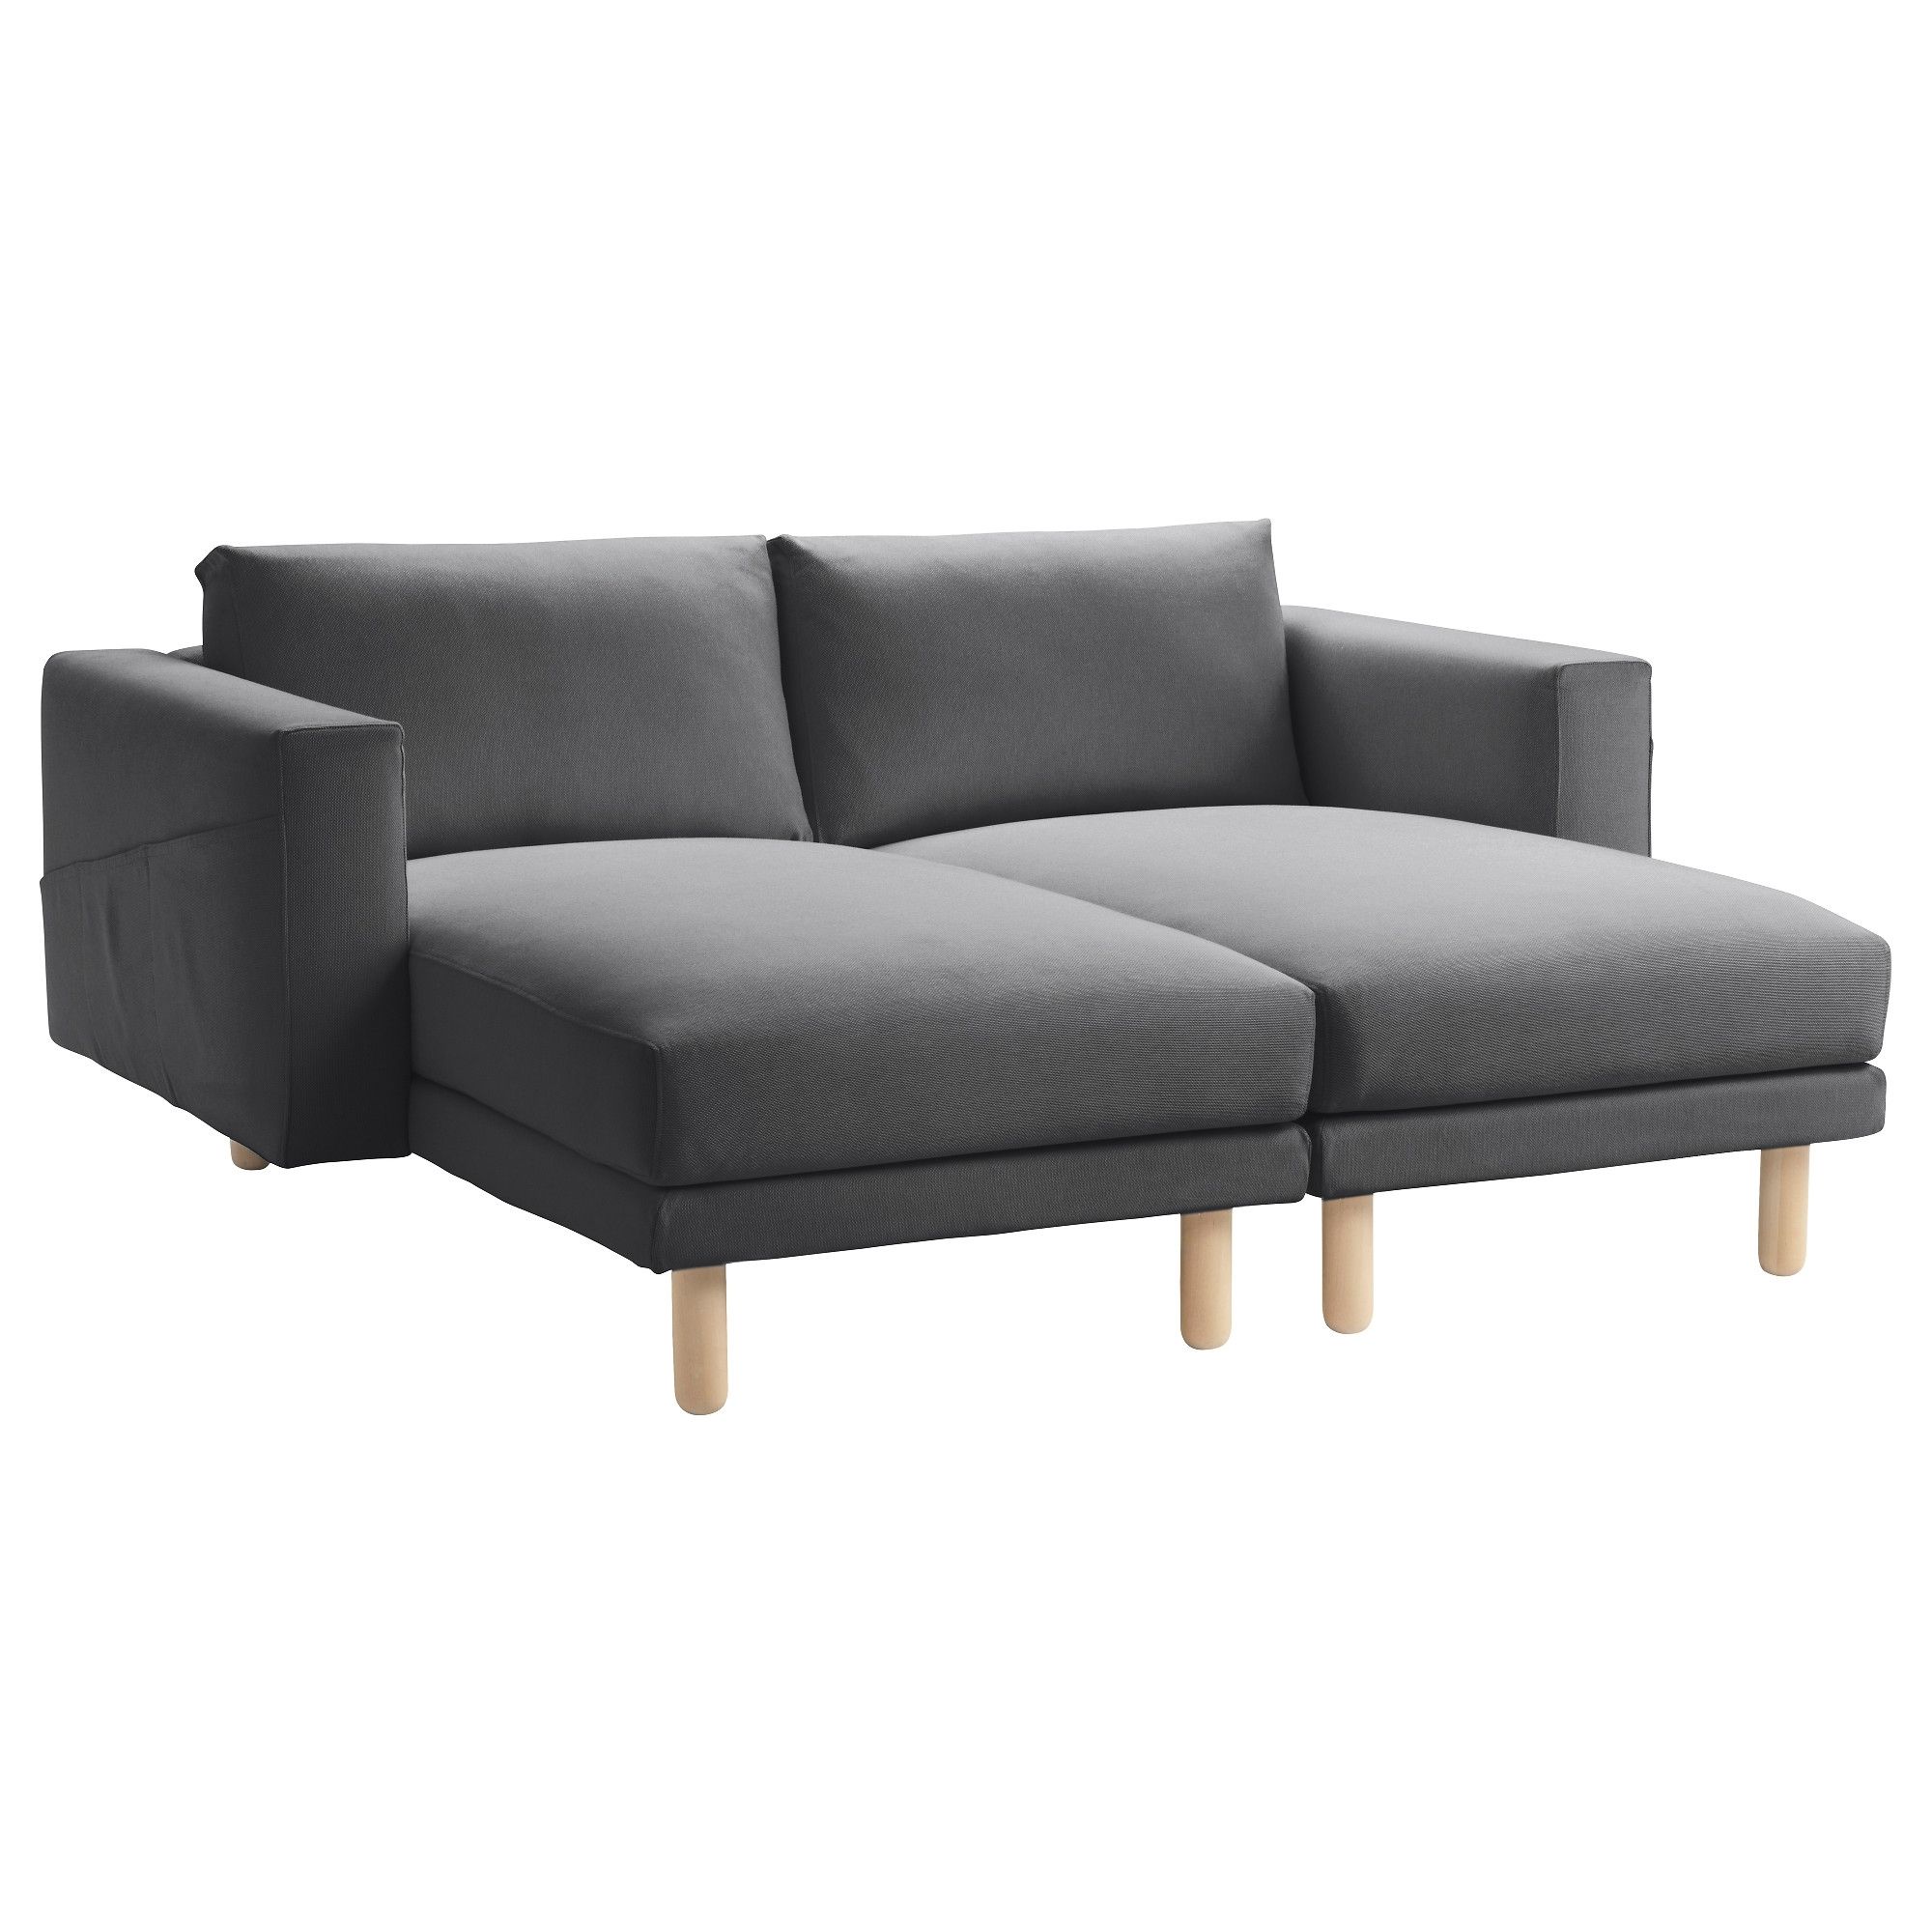 Ikea Chaise Lounge Chairs With Best And Newest Norsborg Sectional, 2 Seat – Finnsta Dark Gray – Ikea (View 7 of 15)